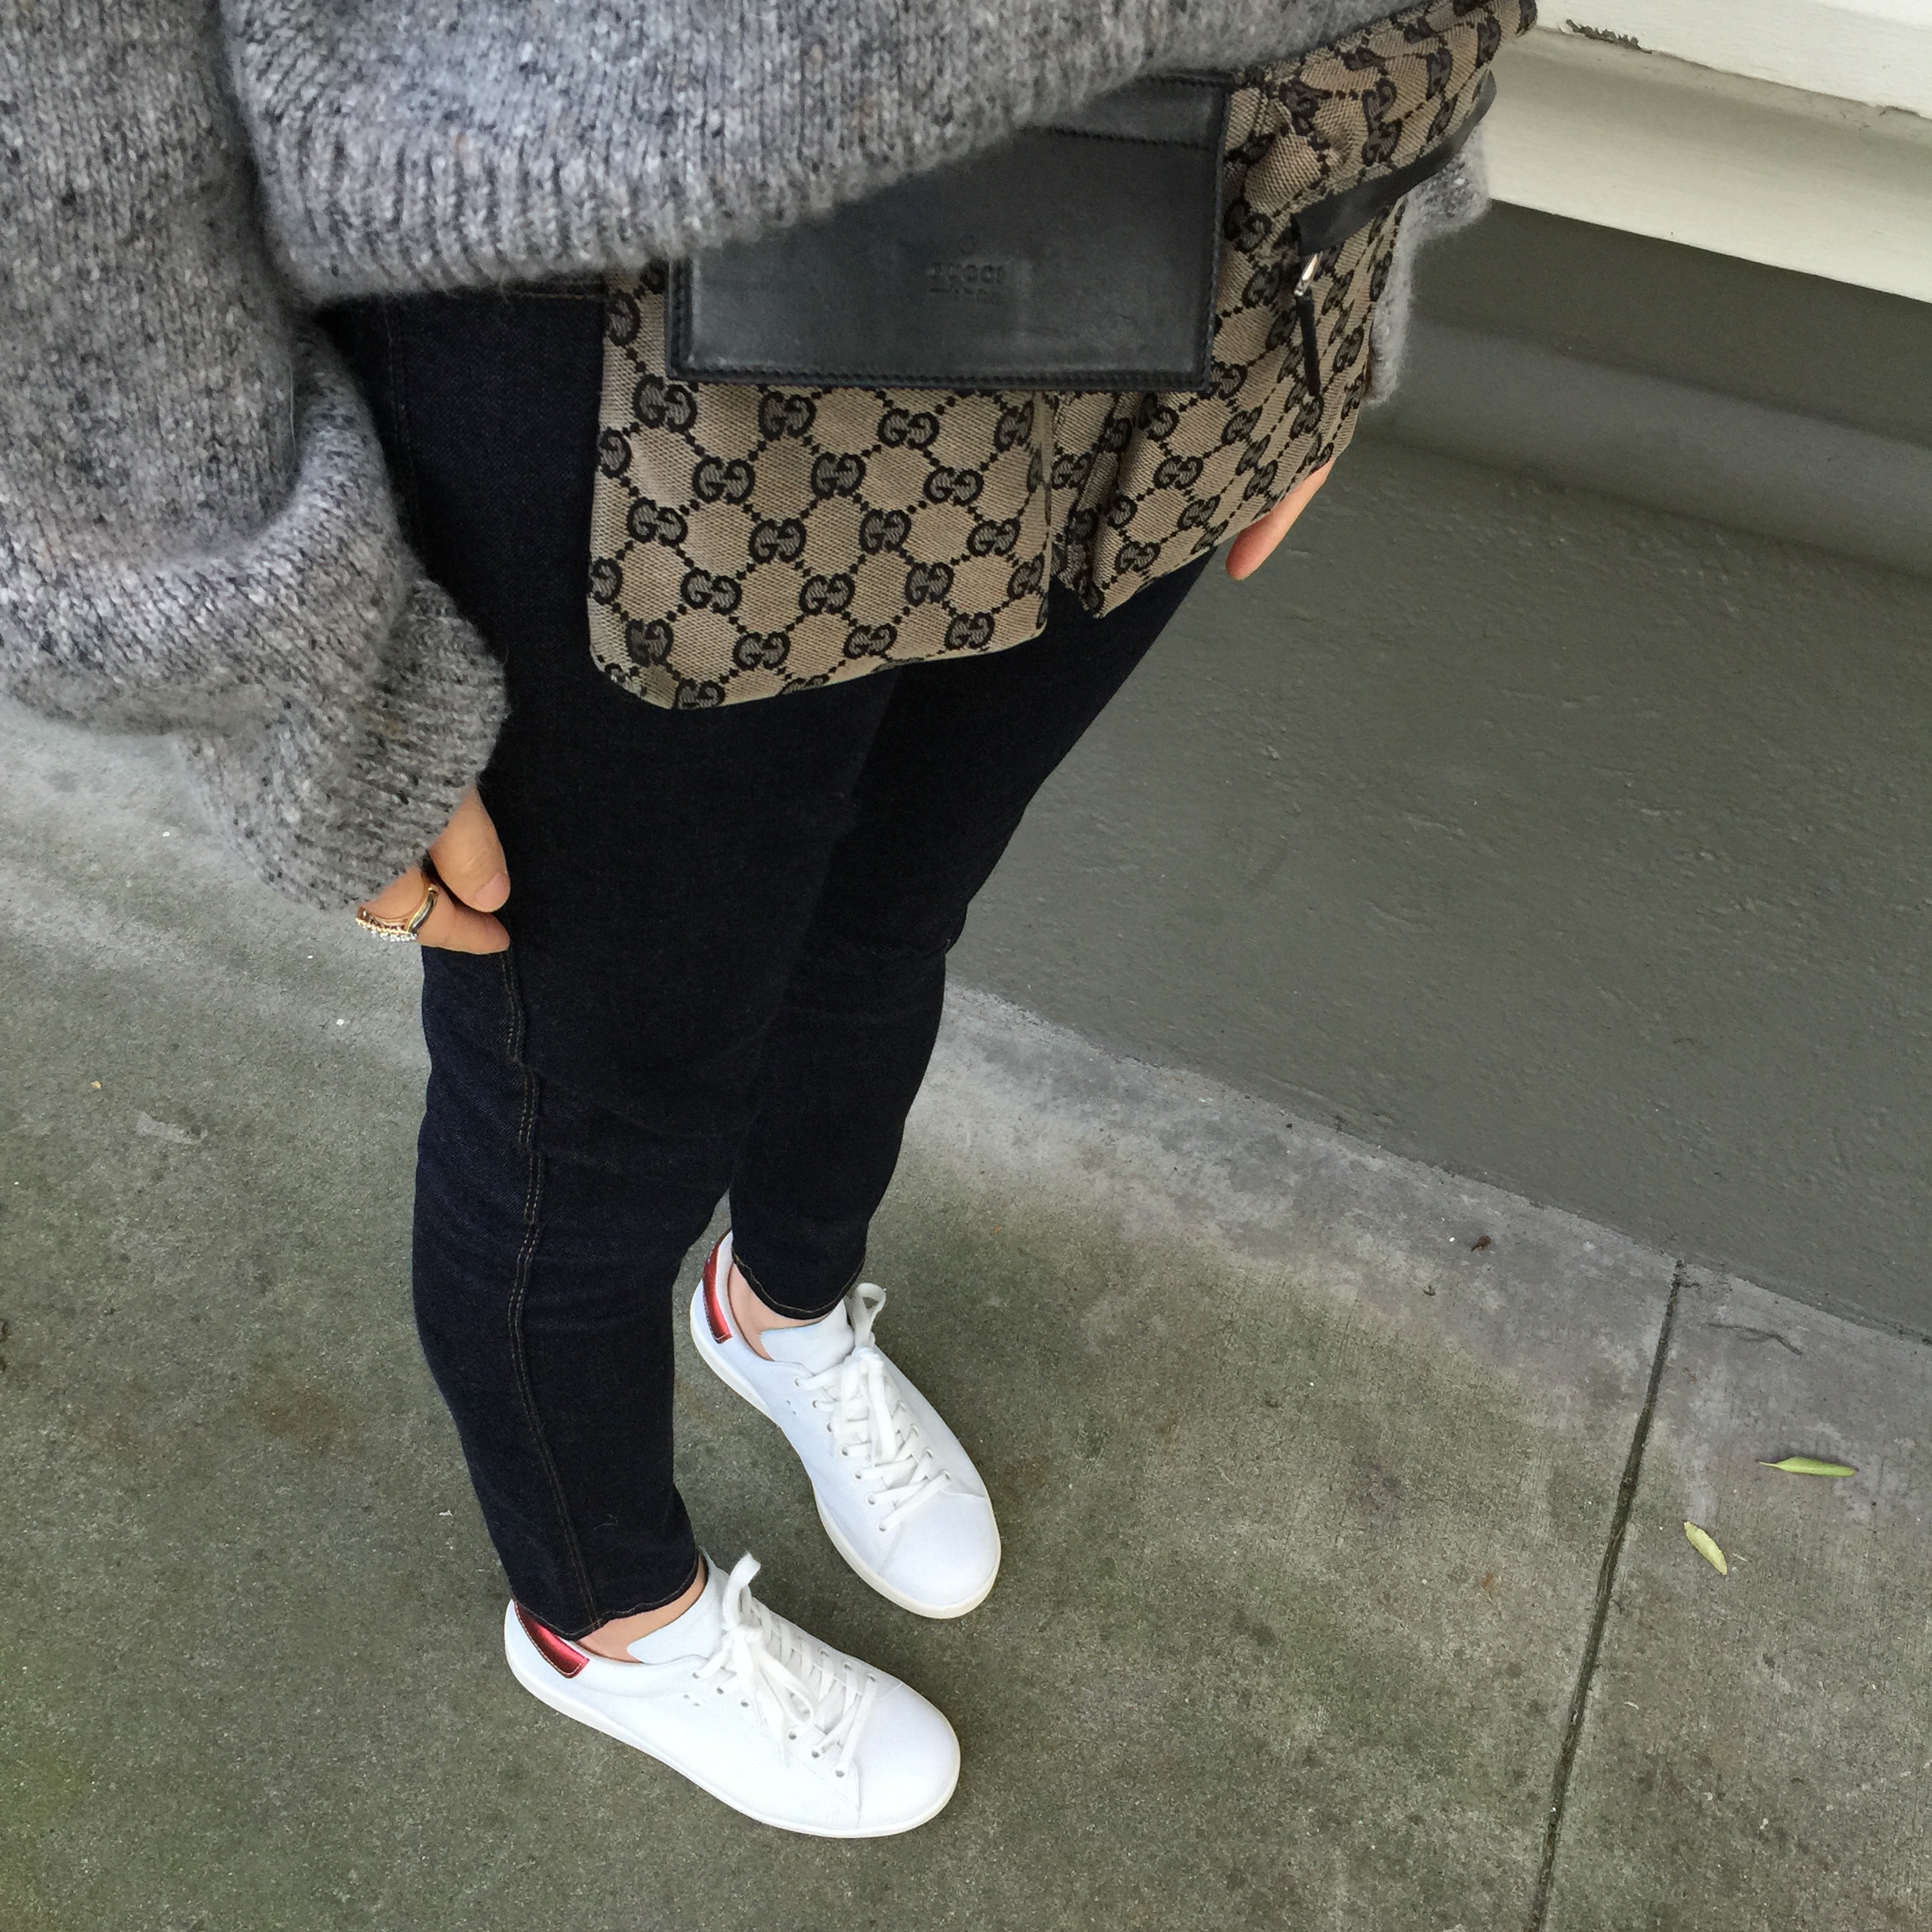 gucci belt bag – WHAT HELEN WORE TODAY